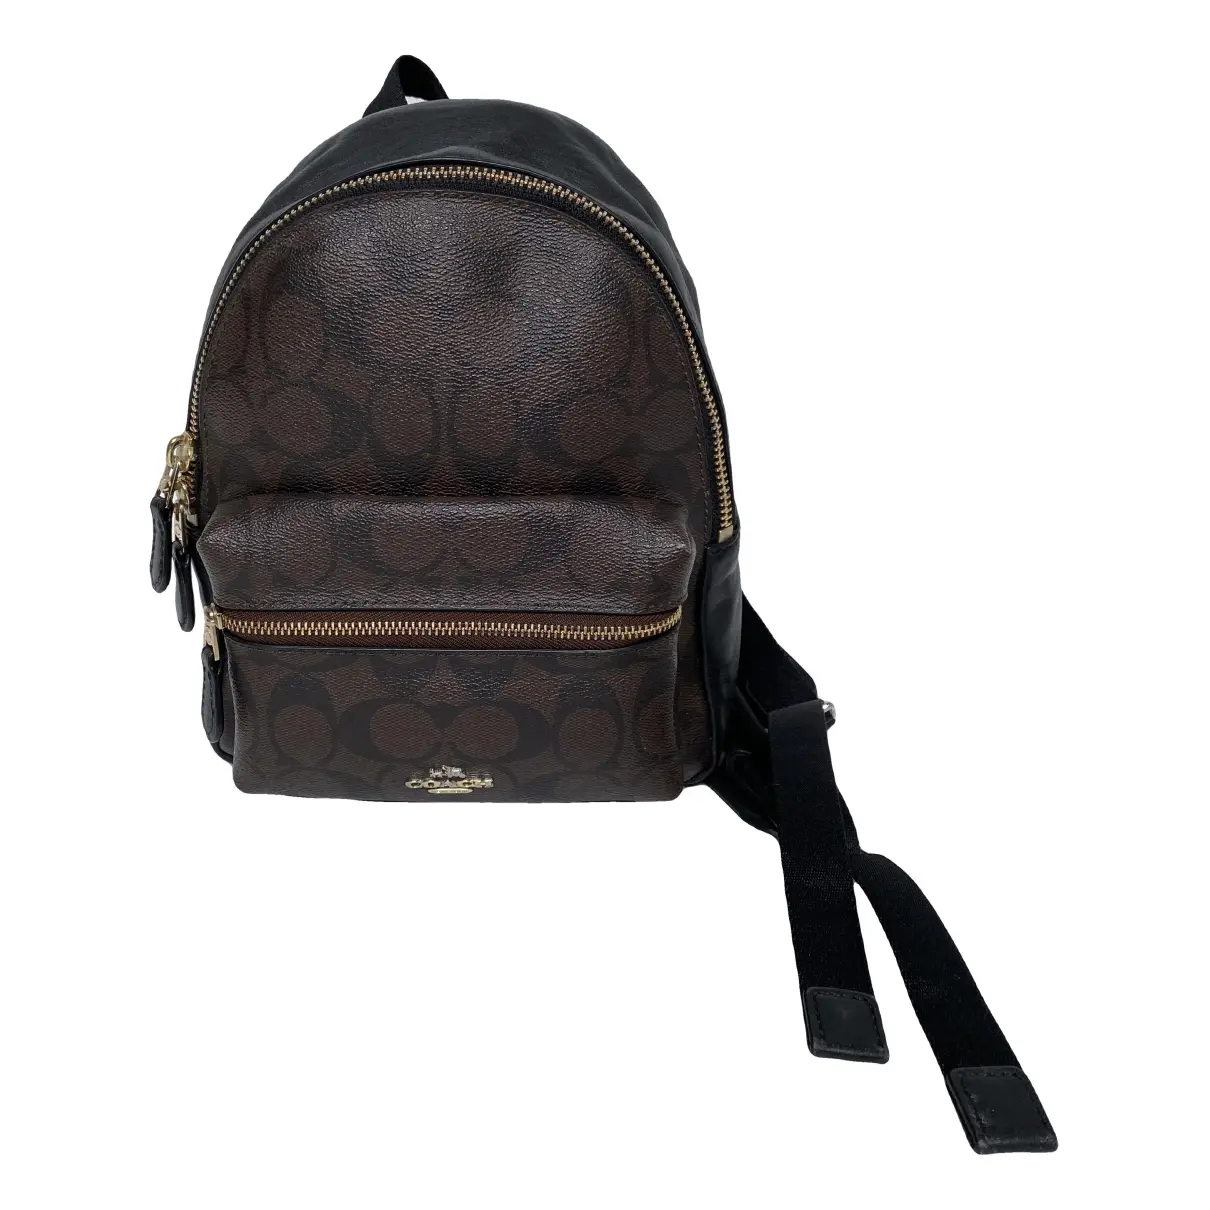 Campus leather backpack